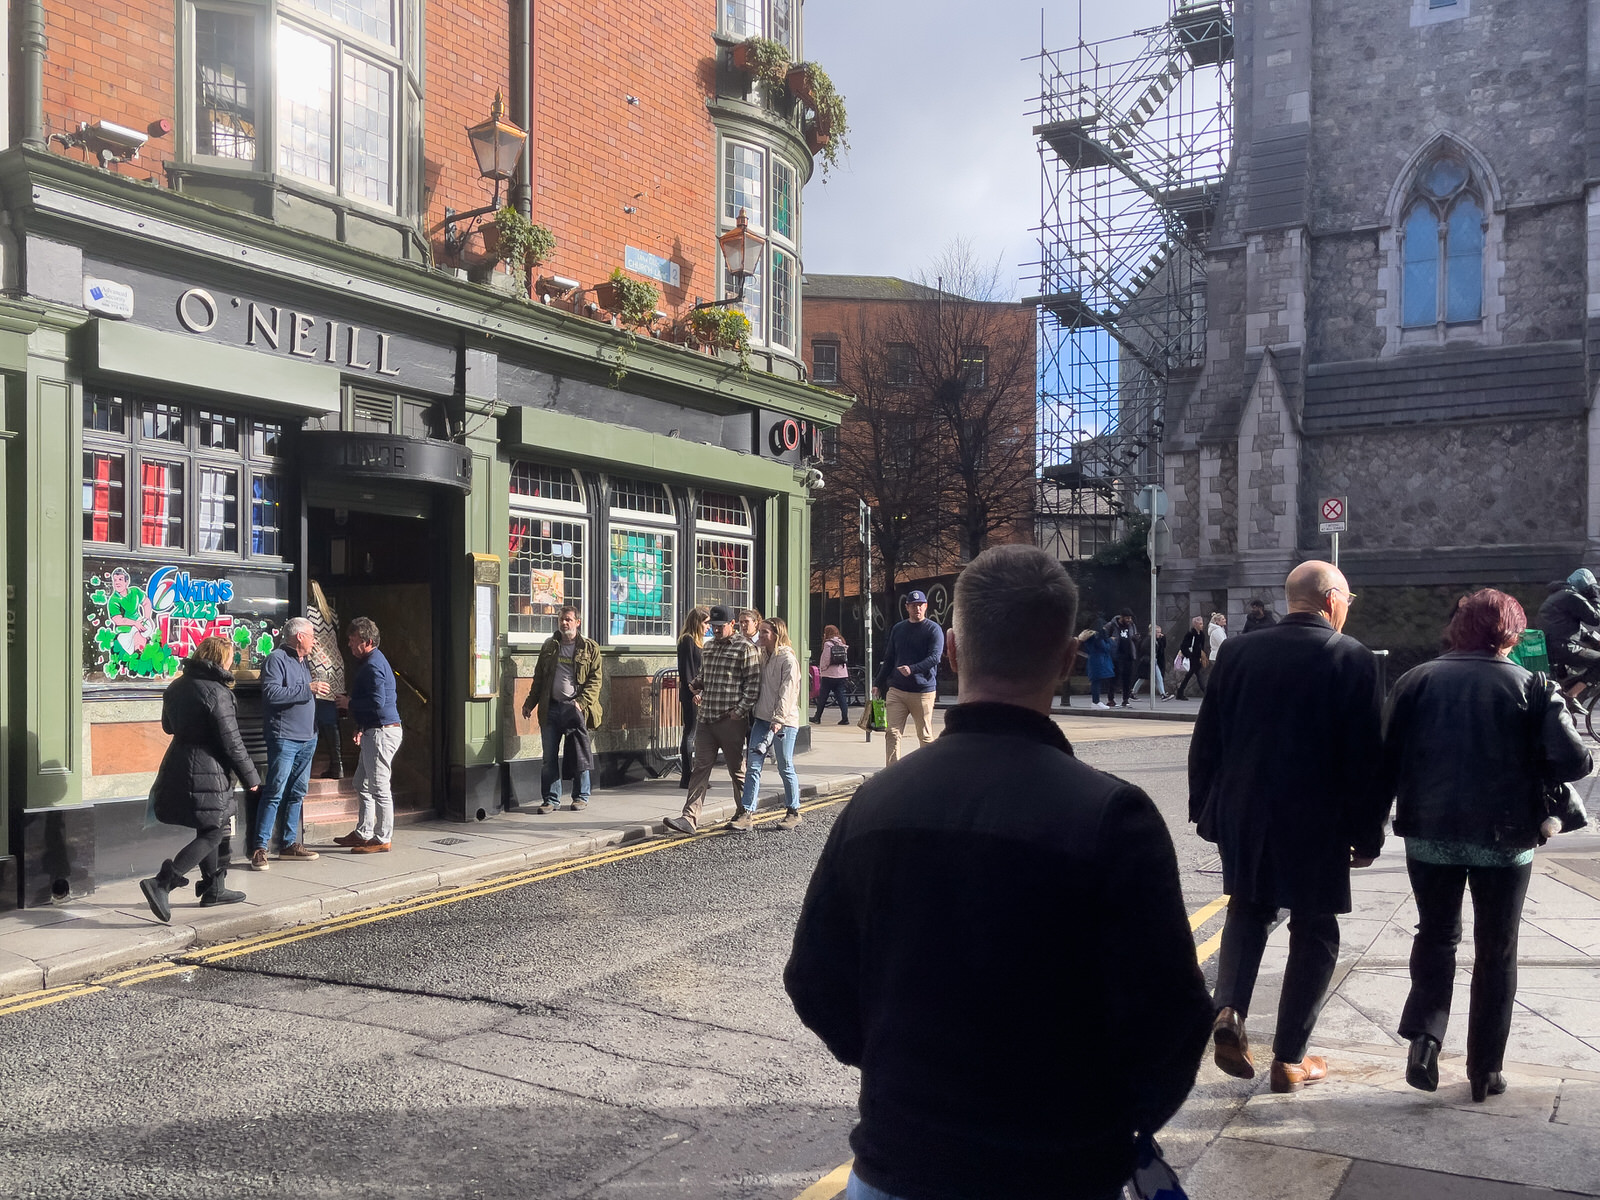 SUFFOLK STREET IS HOME TO MOLLY MALONE AND THE O'NEILL PUB 